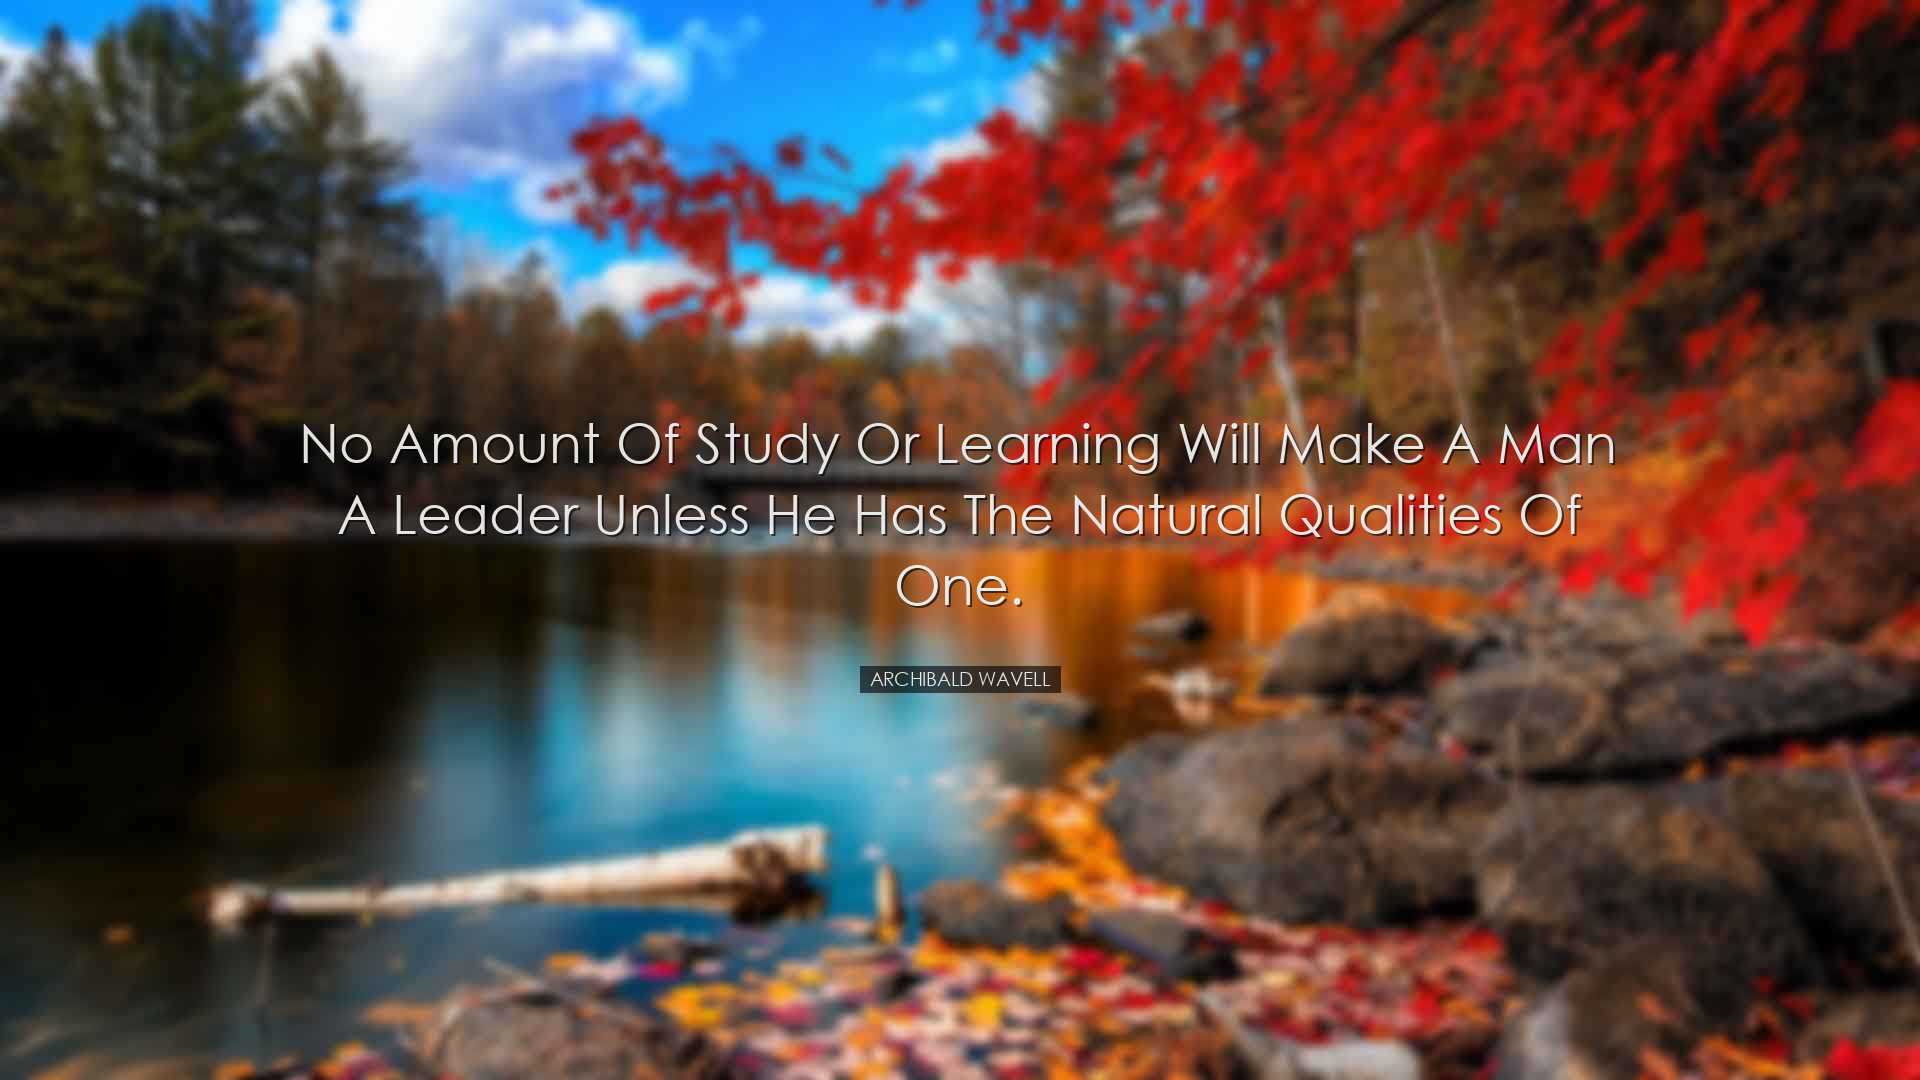 No amount of study or learning will make a man a leader unless he